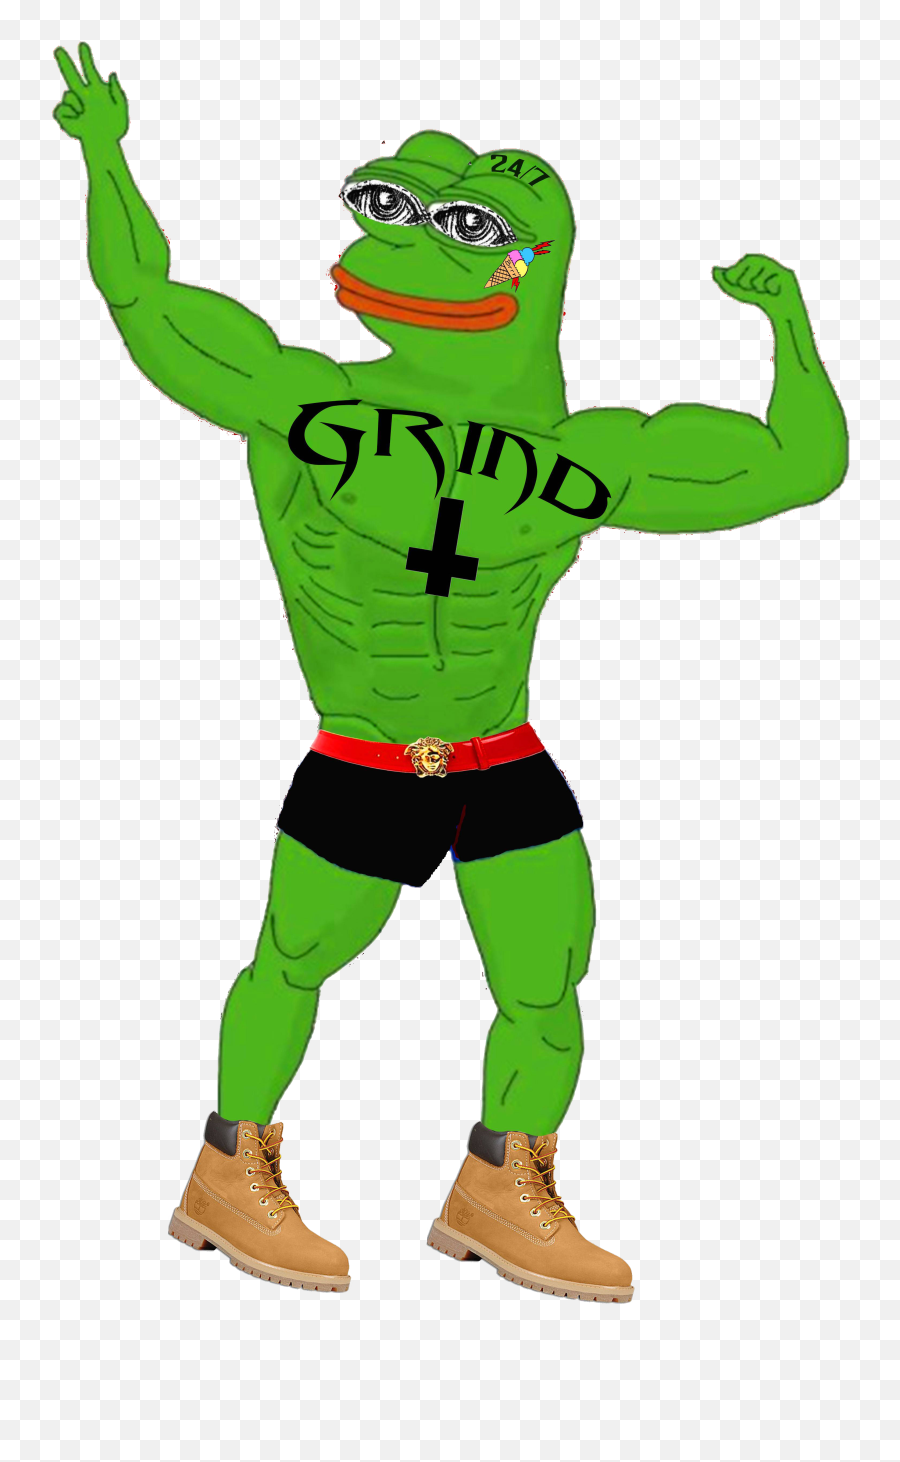 Grind Pepe - Pepe The Frog Lifting Full Size Png Download Pepe The Frog Wearing Crown,Pepe The Frog Png